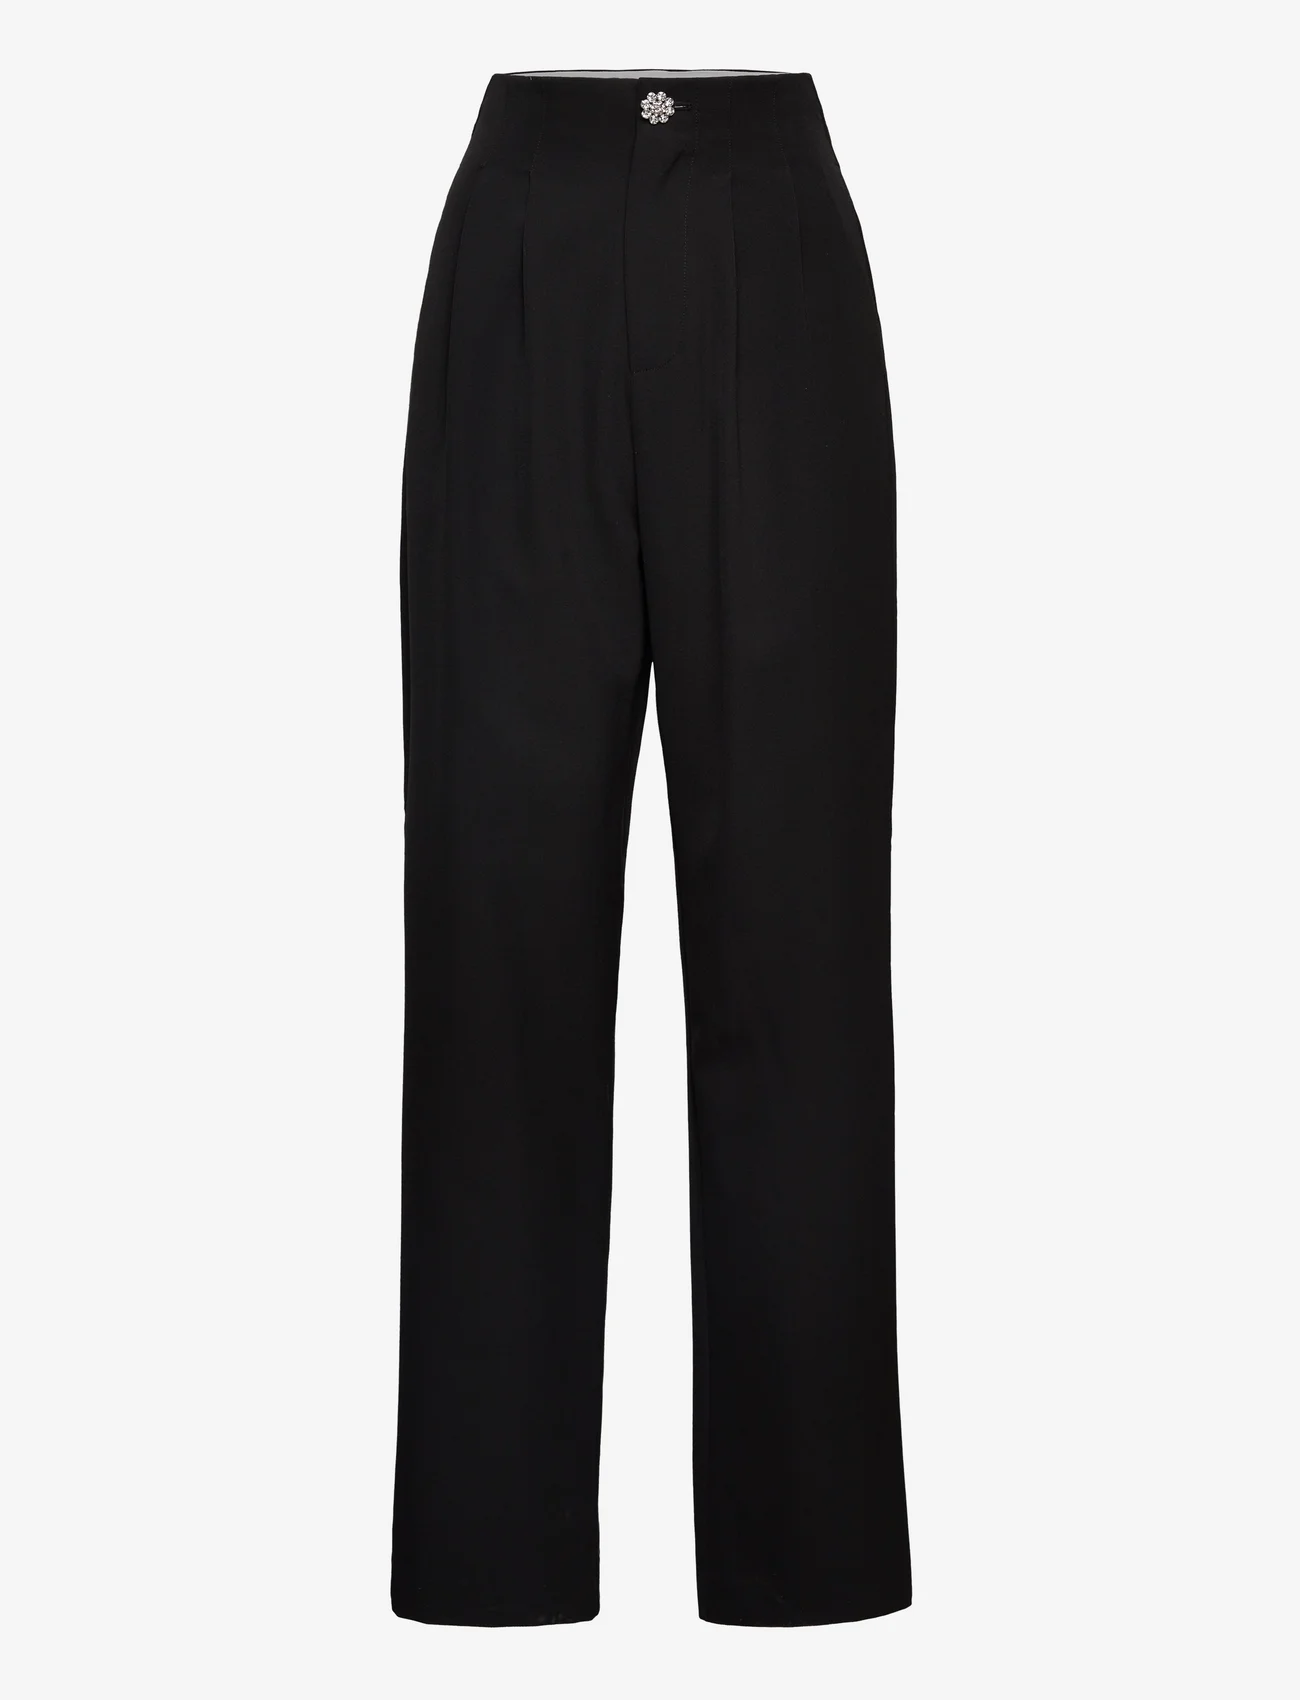 Custommade - Prudence - tailored trousers - 999 anthracite black - 1